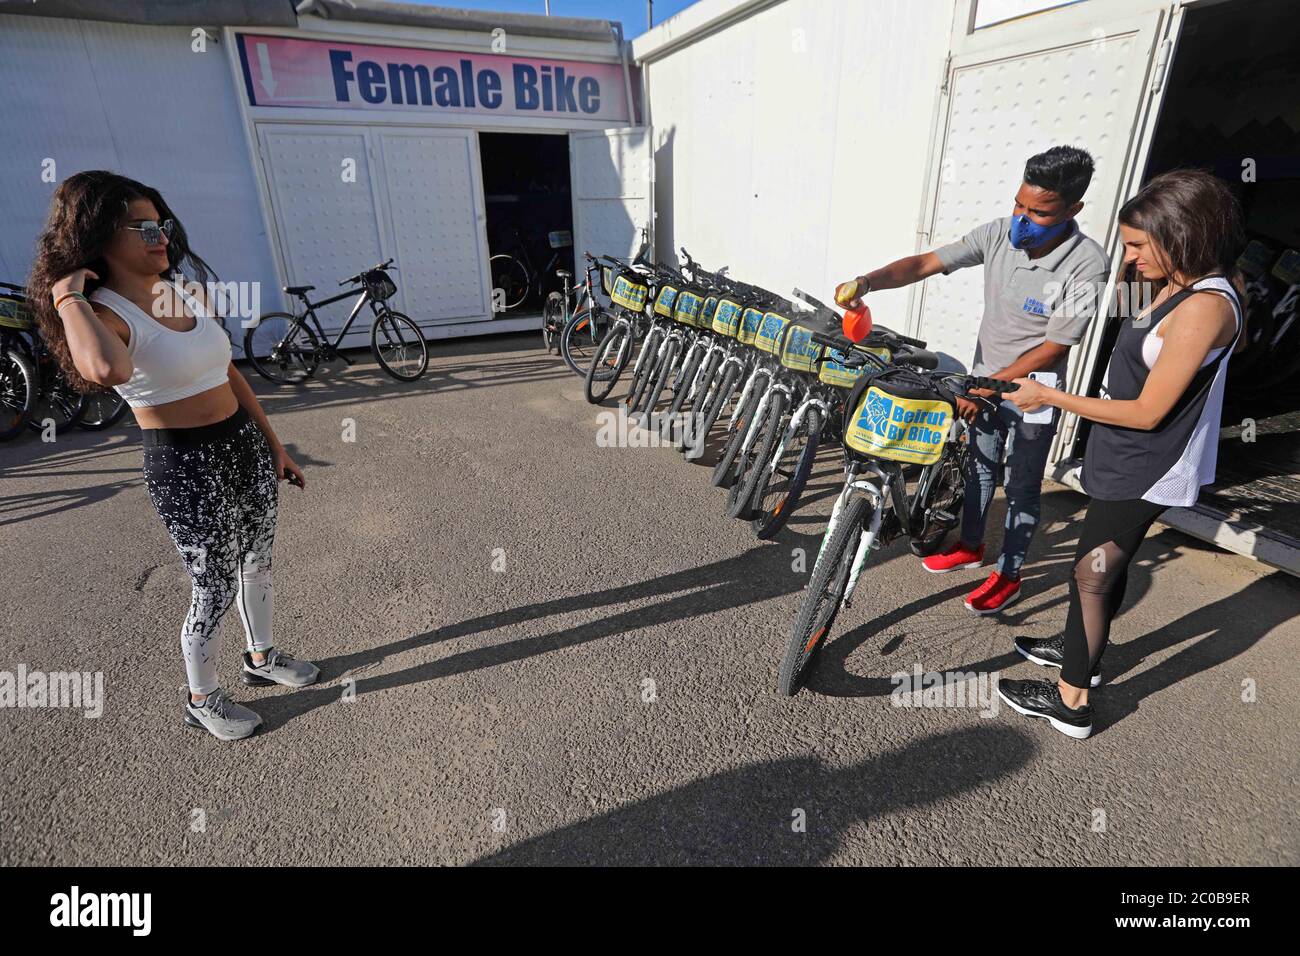 Beirut, Lebanon. 11th June, 2020. A woman rents a bike at a bike rental shop  in Beirut, Lebanon, June 11, 2020. It has become a common scene in Lebanon  recently that more